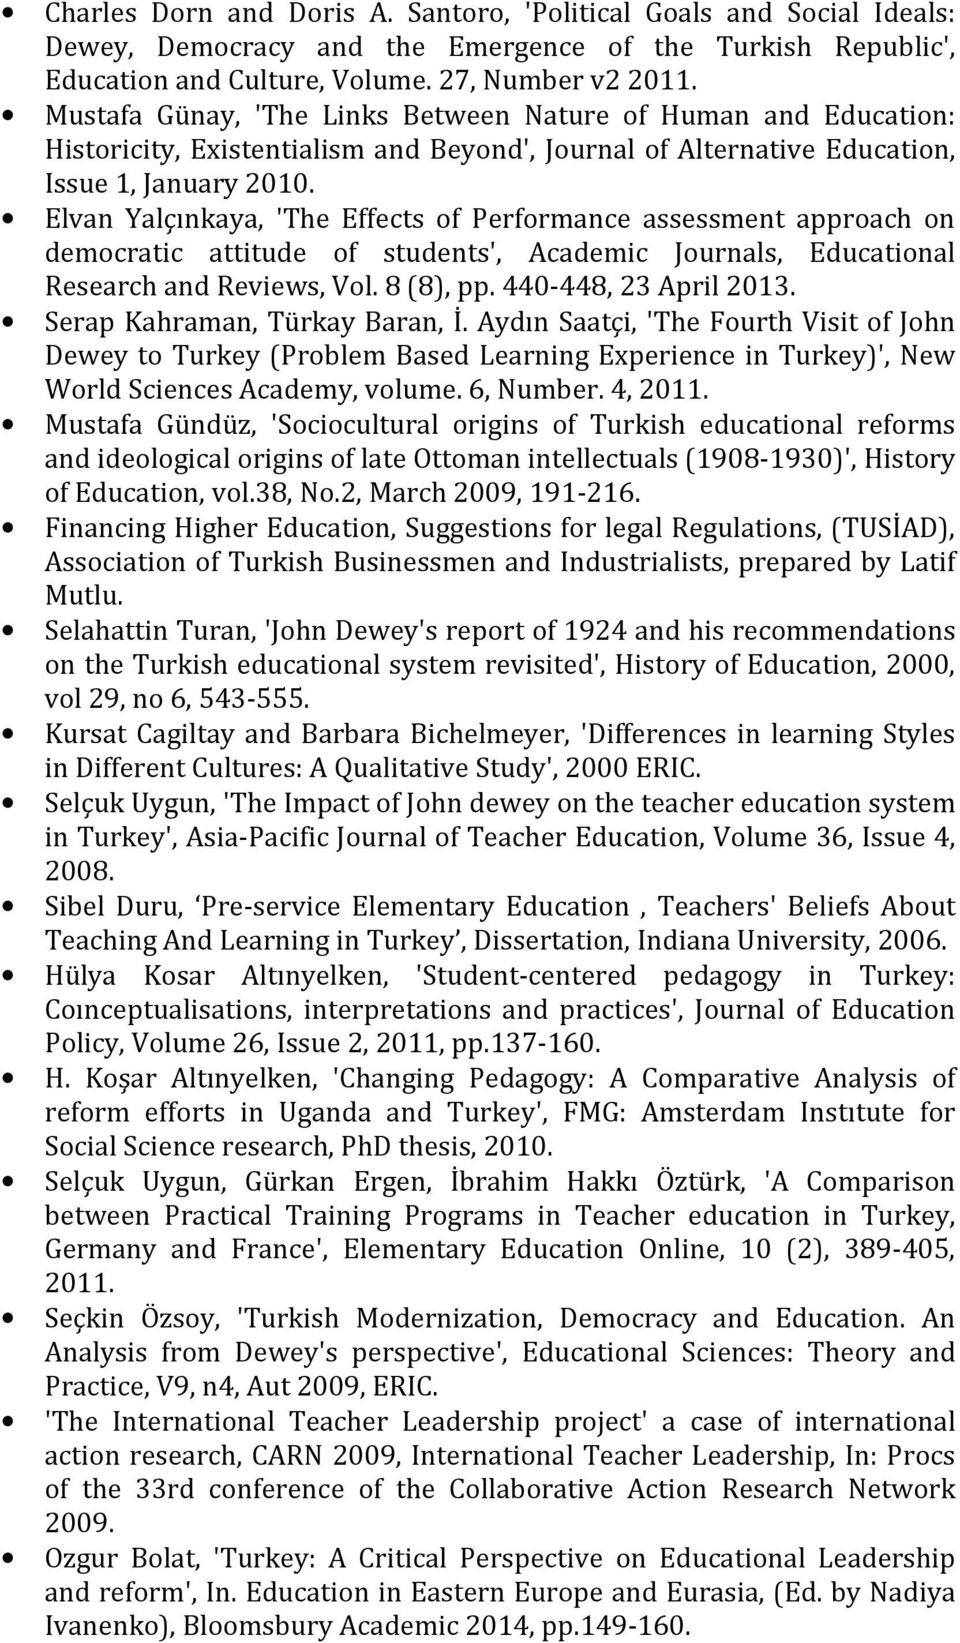 Elvan Yalçınkaya, 'The Effects of Performance assessment approach on democratic attitude of students', Academic Journals, Educational Research and Reviews, Vol. 8 (8), pp. 440-448, 23 April 2013.